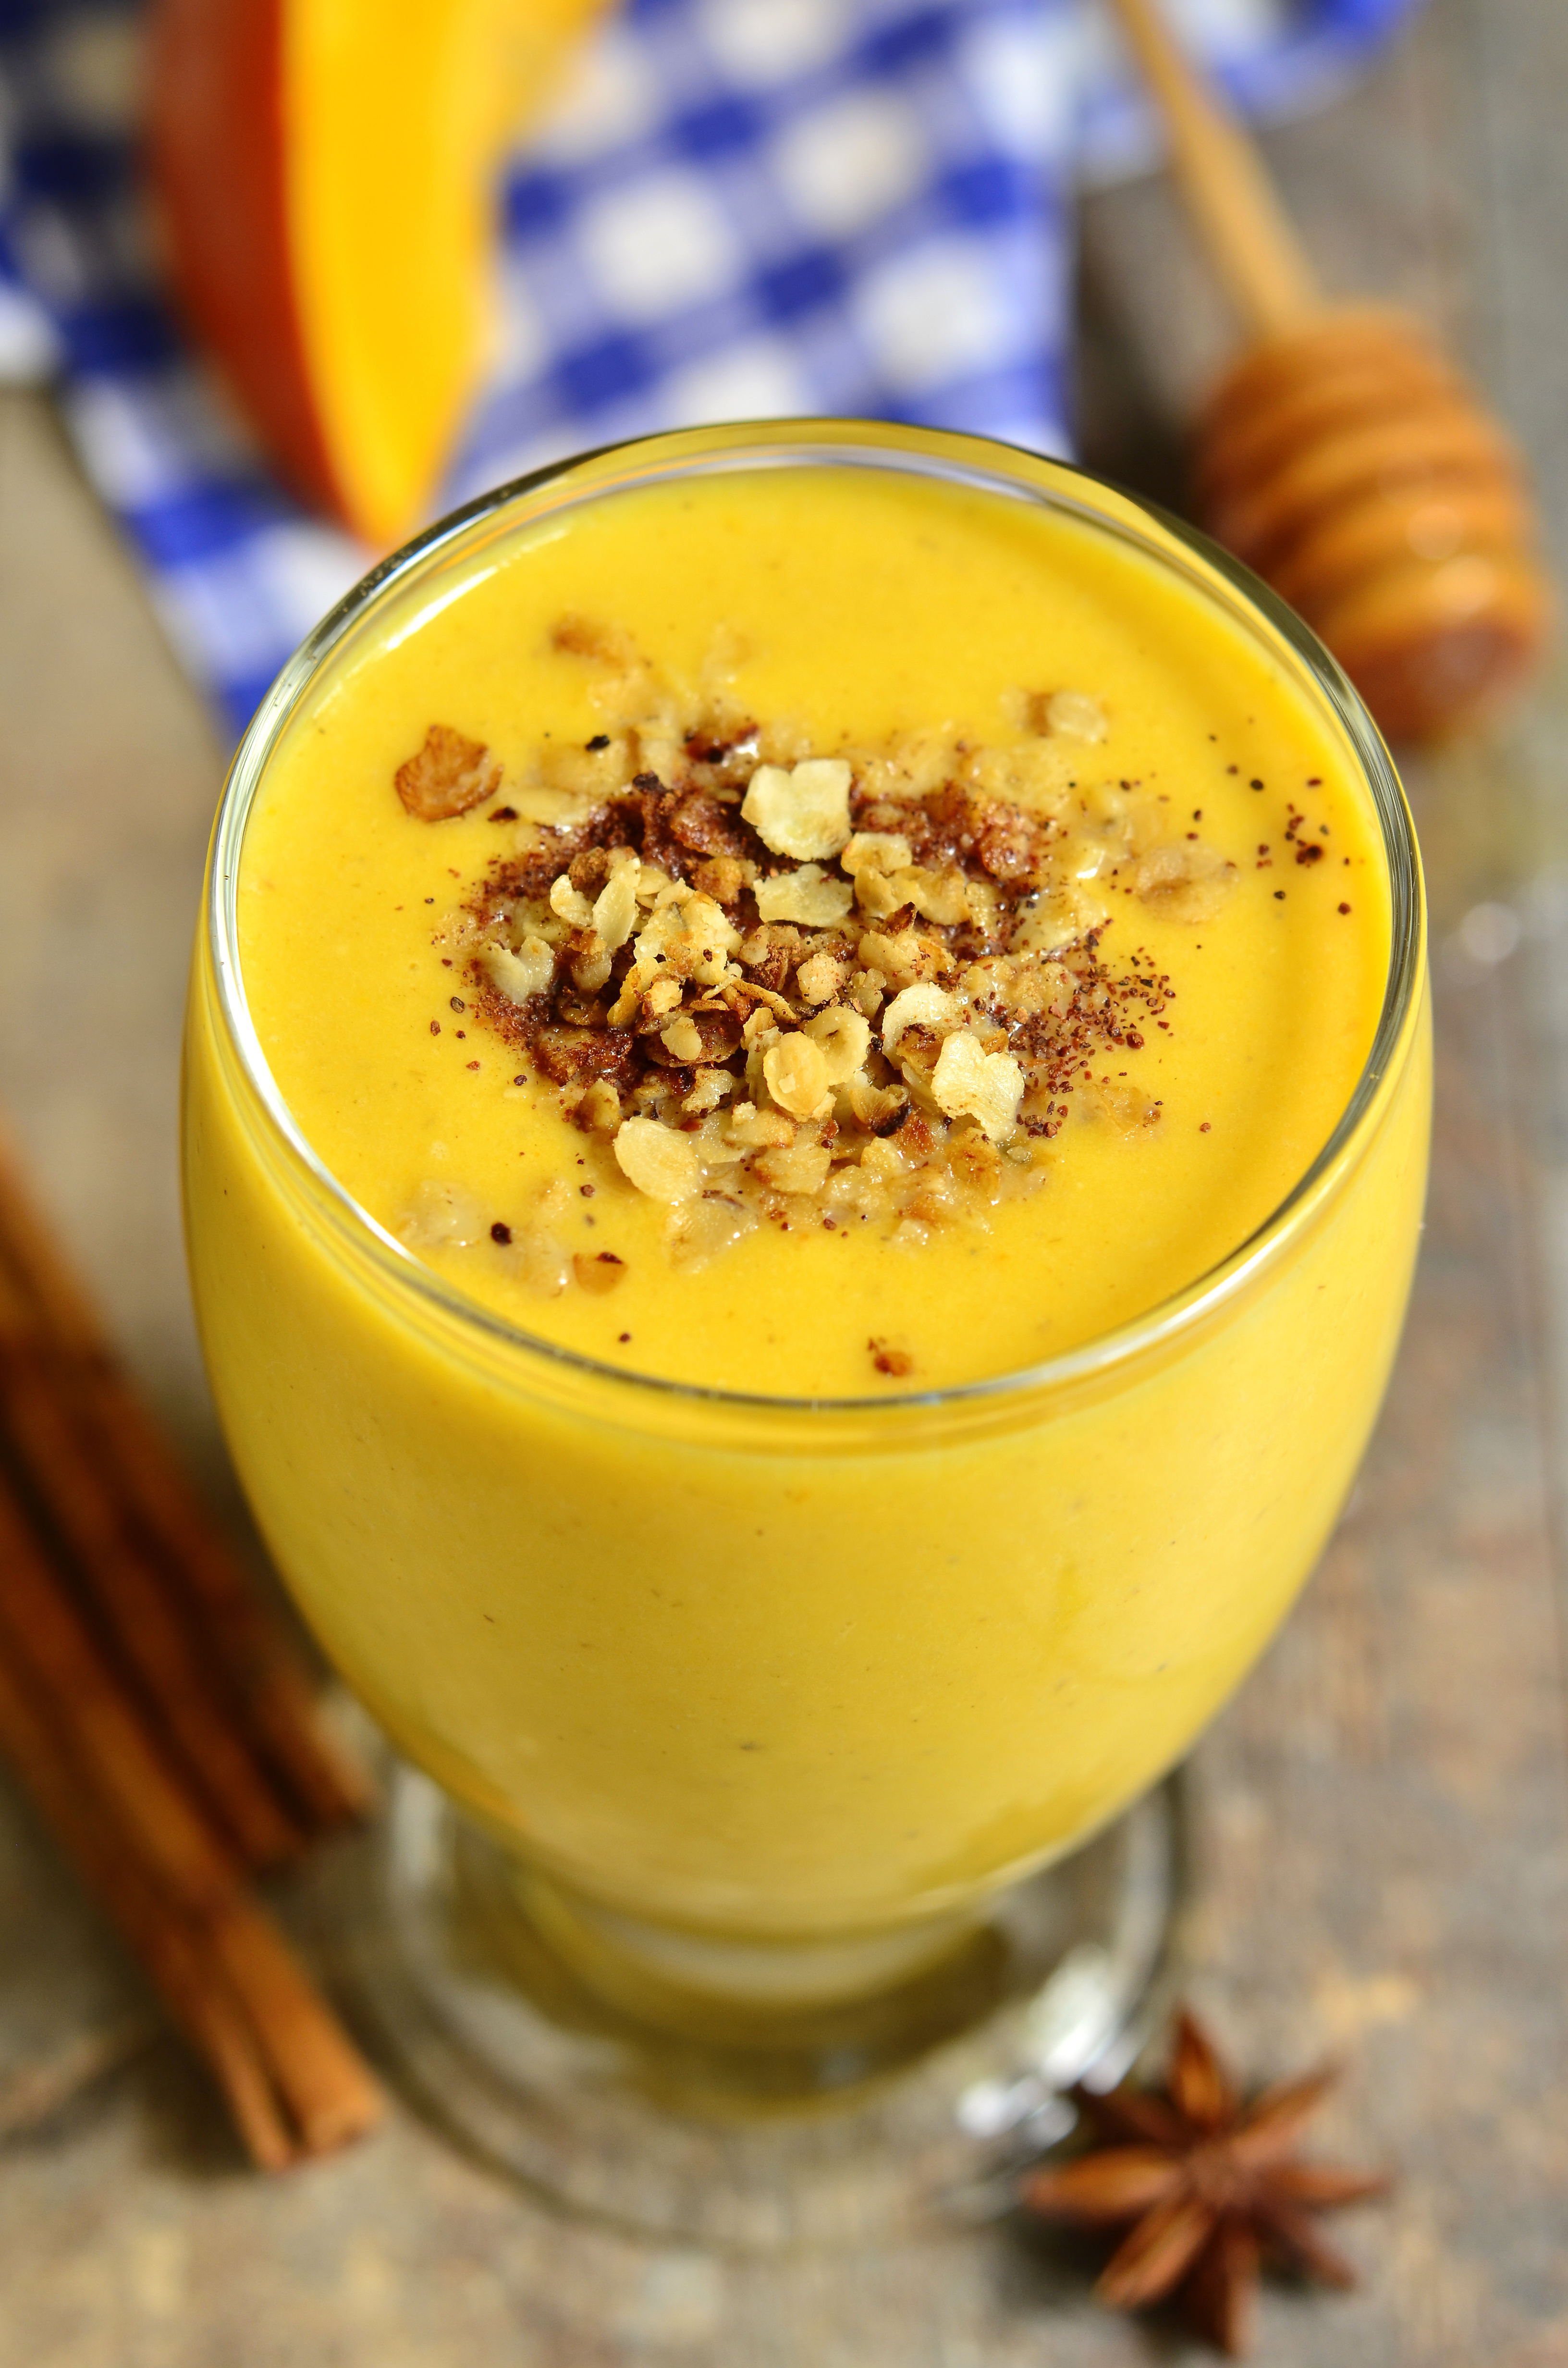 Try This Vegan Mango Lassi For A Glassful Of Goodness | HuffPost India